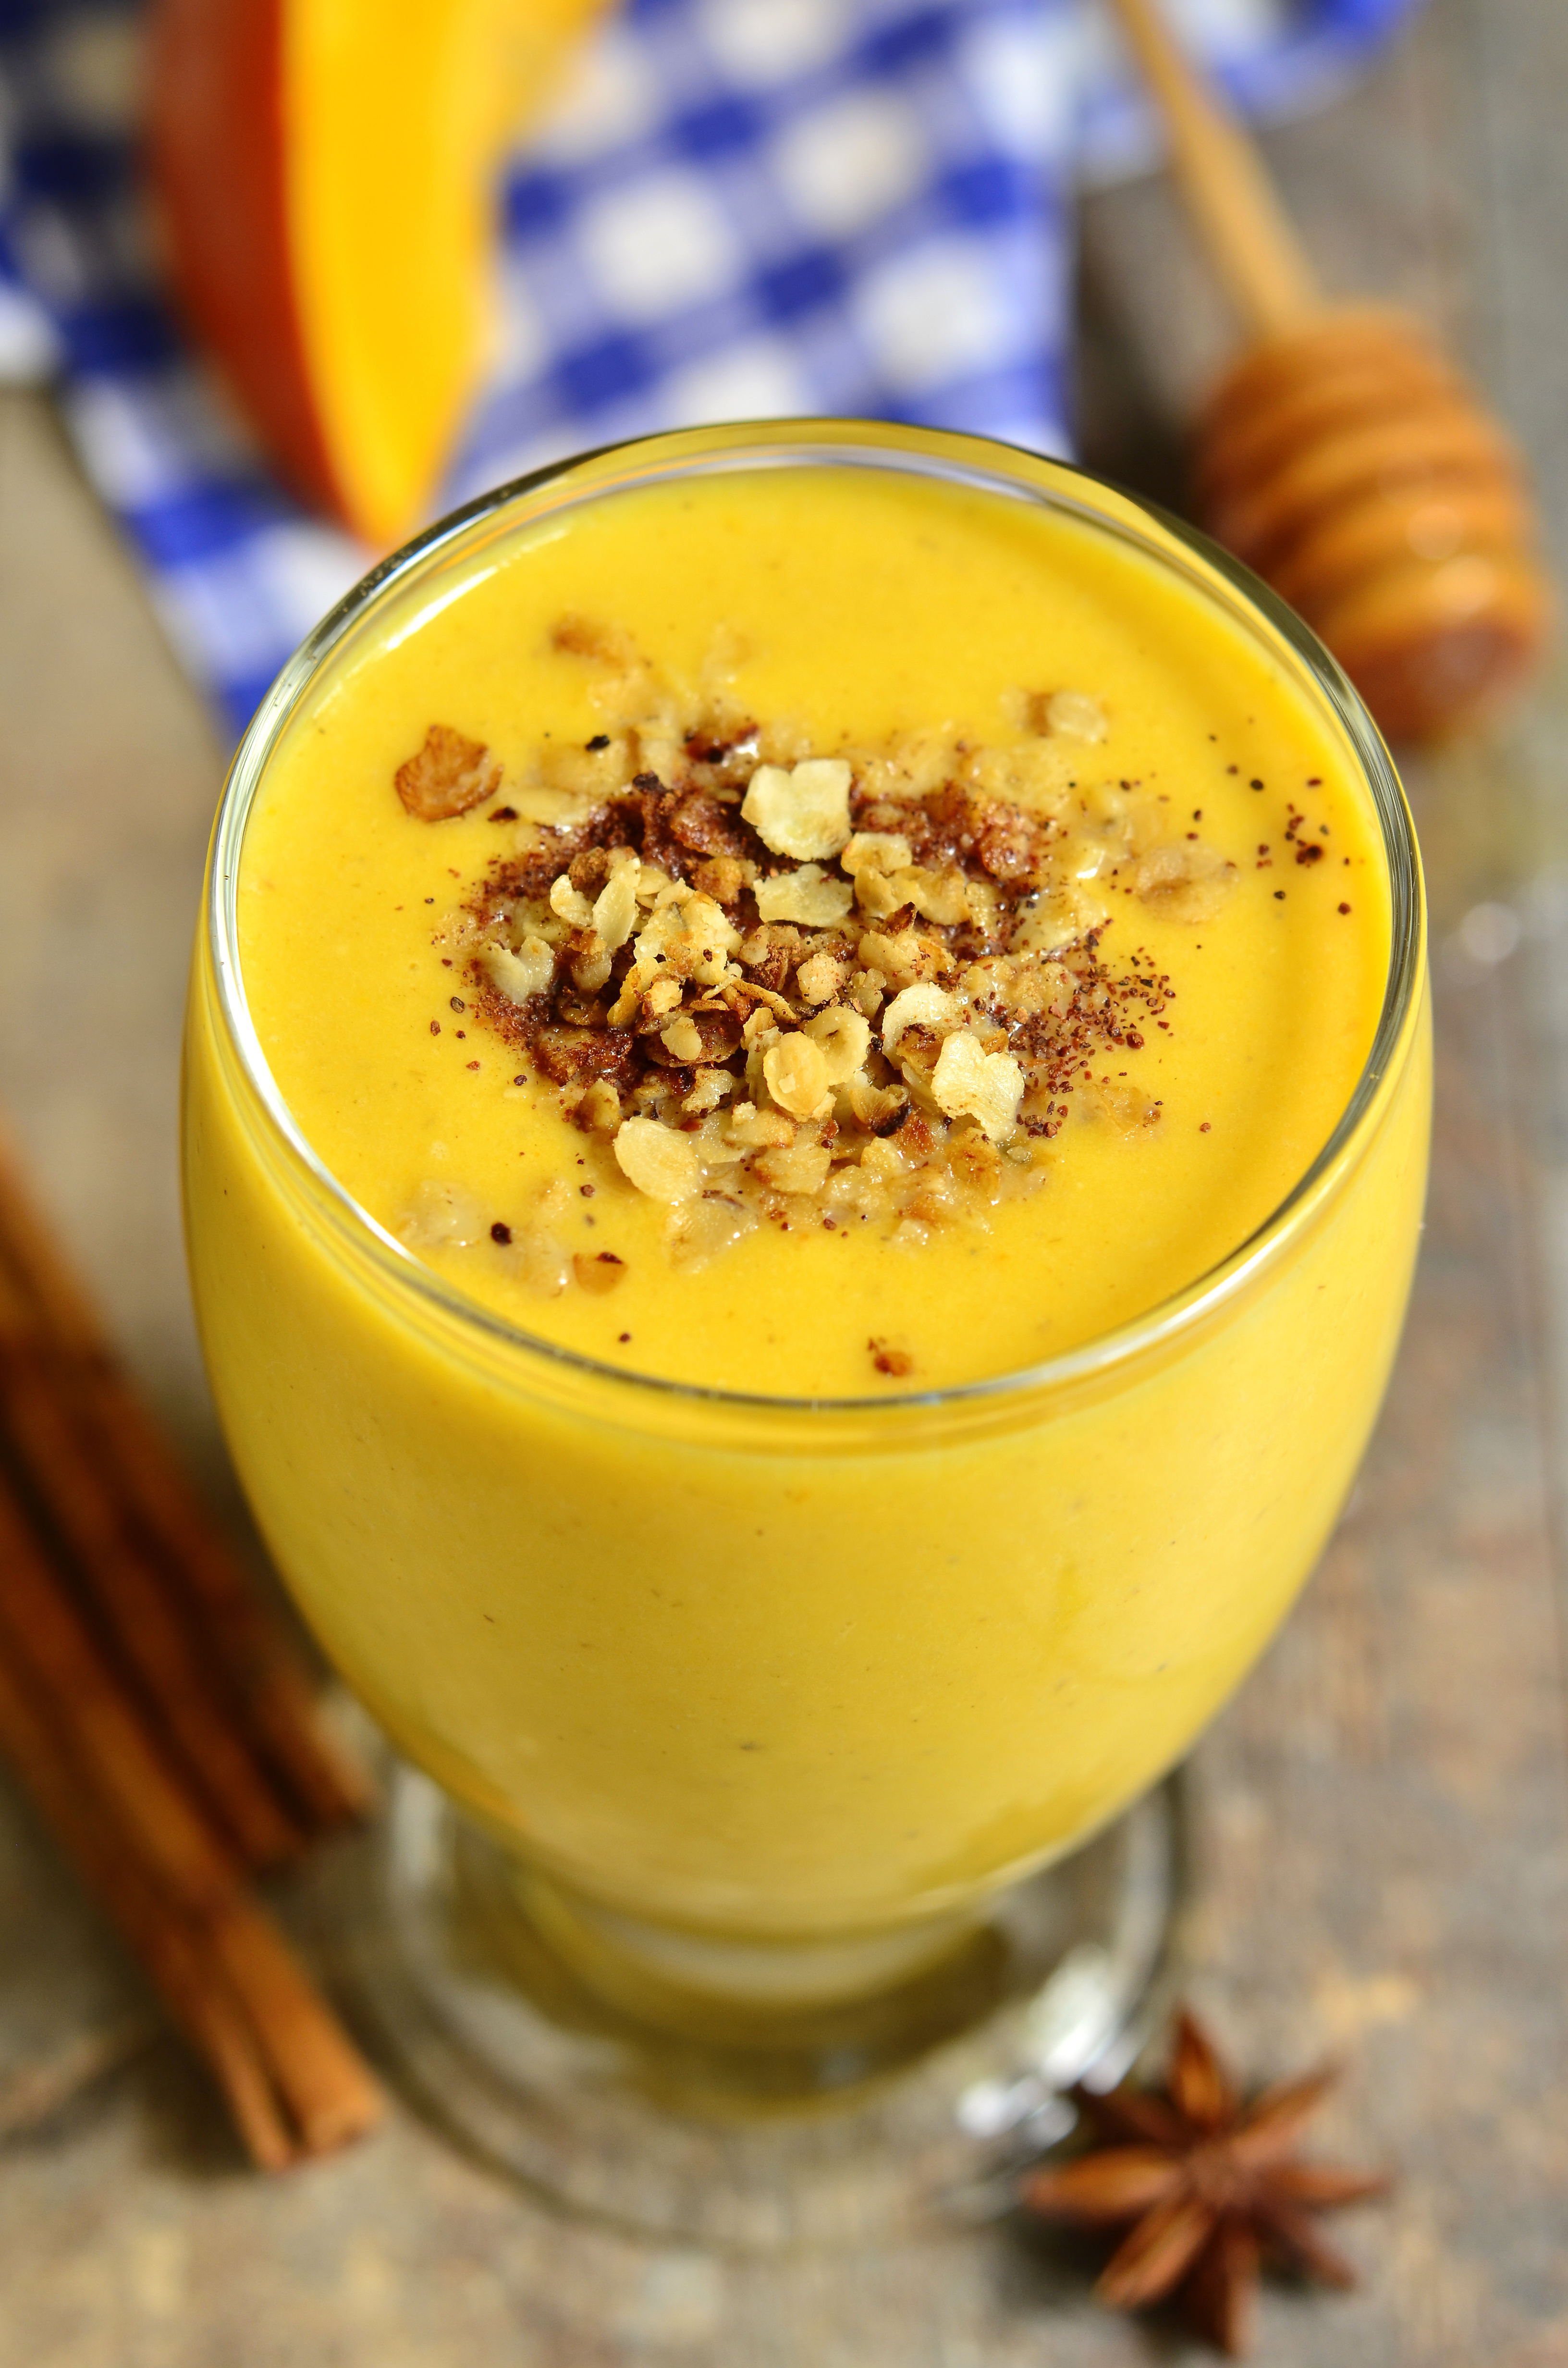 Try This Vegan Mango Lassi For A Glassful Of Goodness | HuffPost India